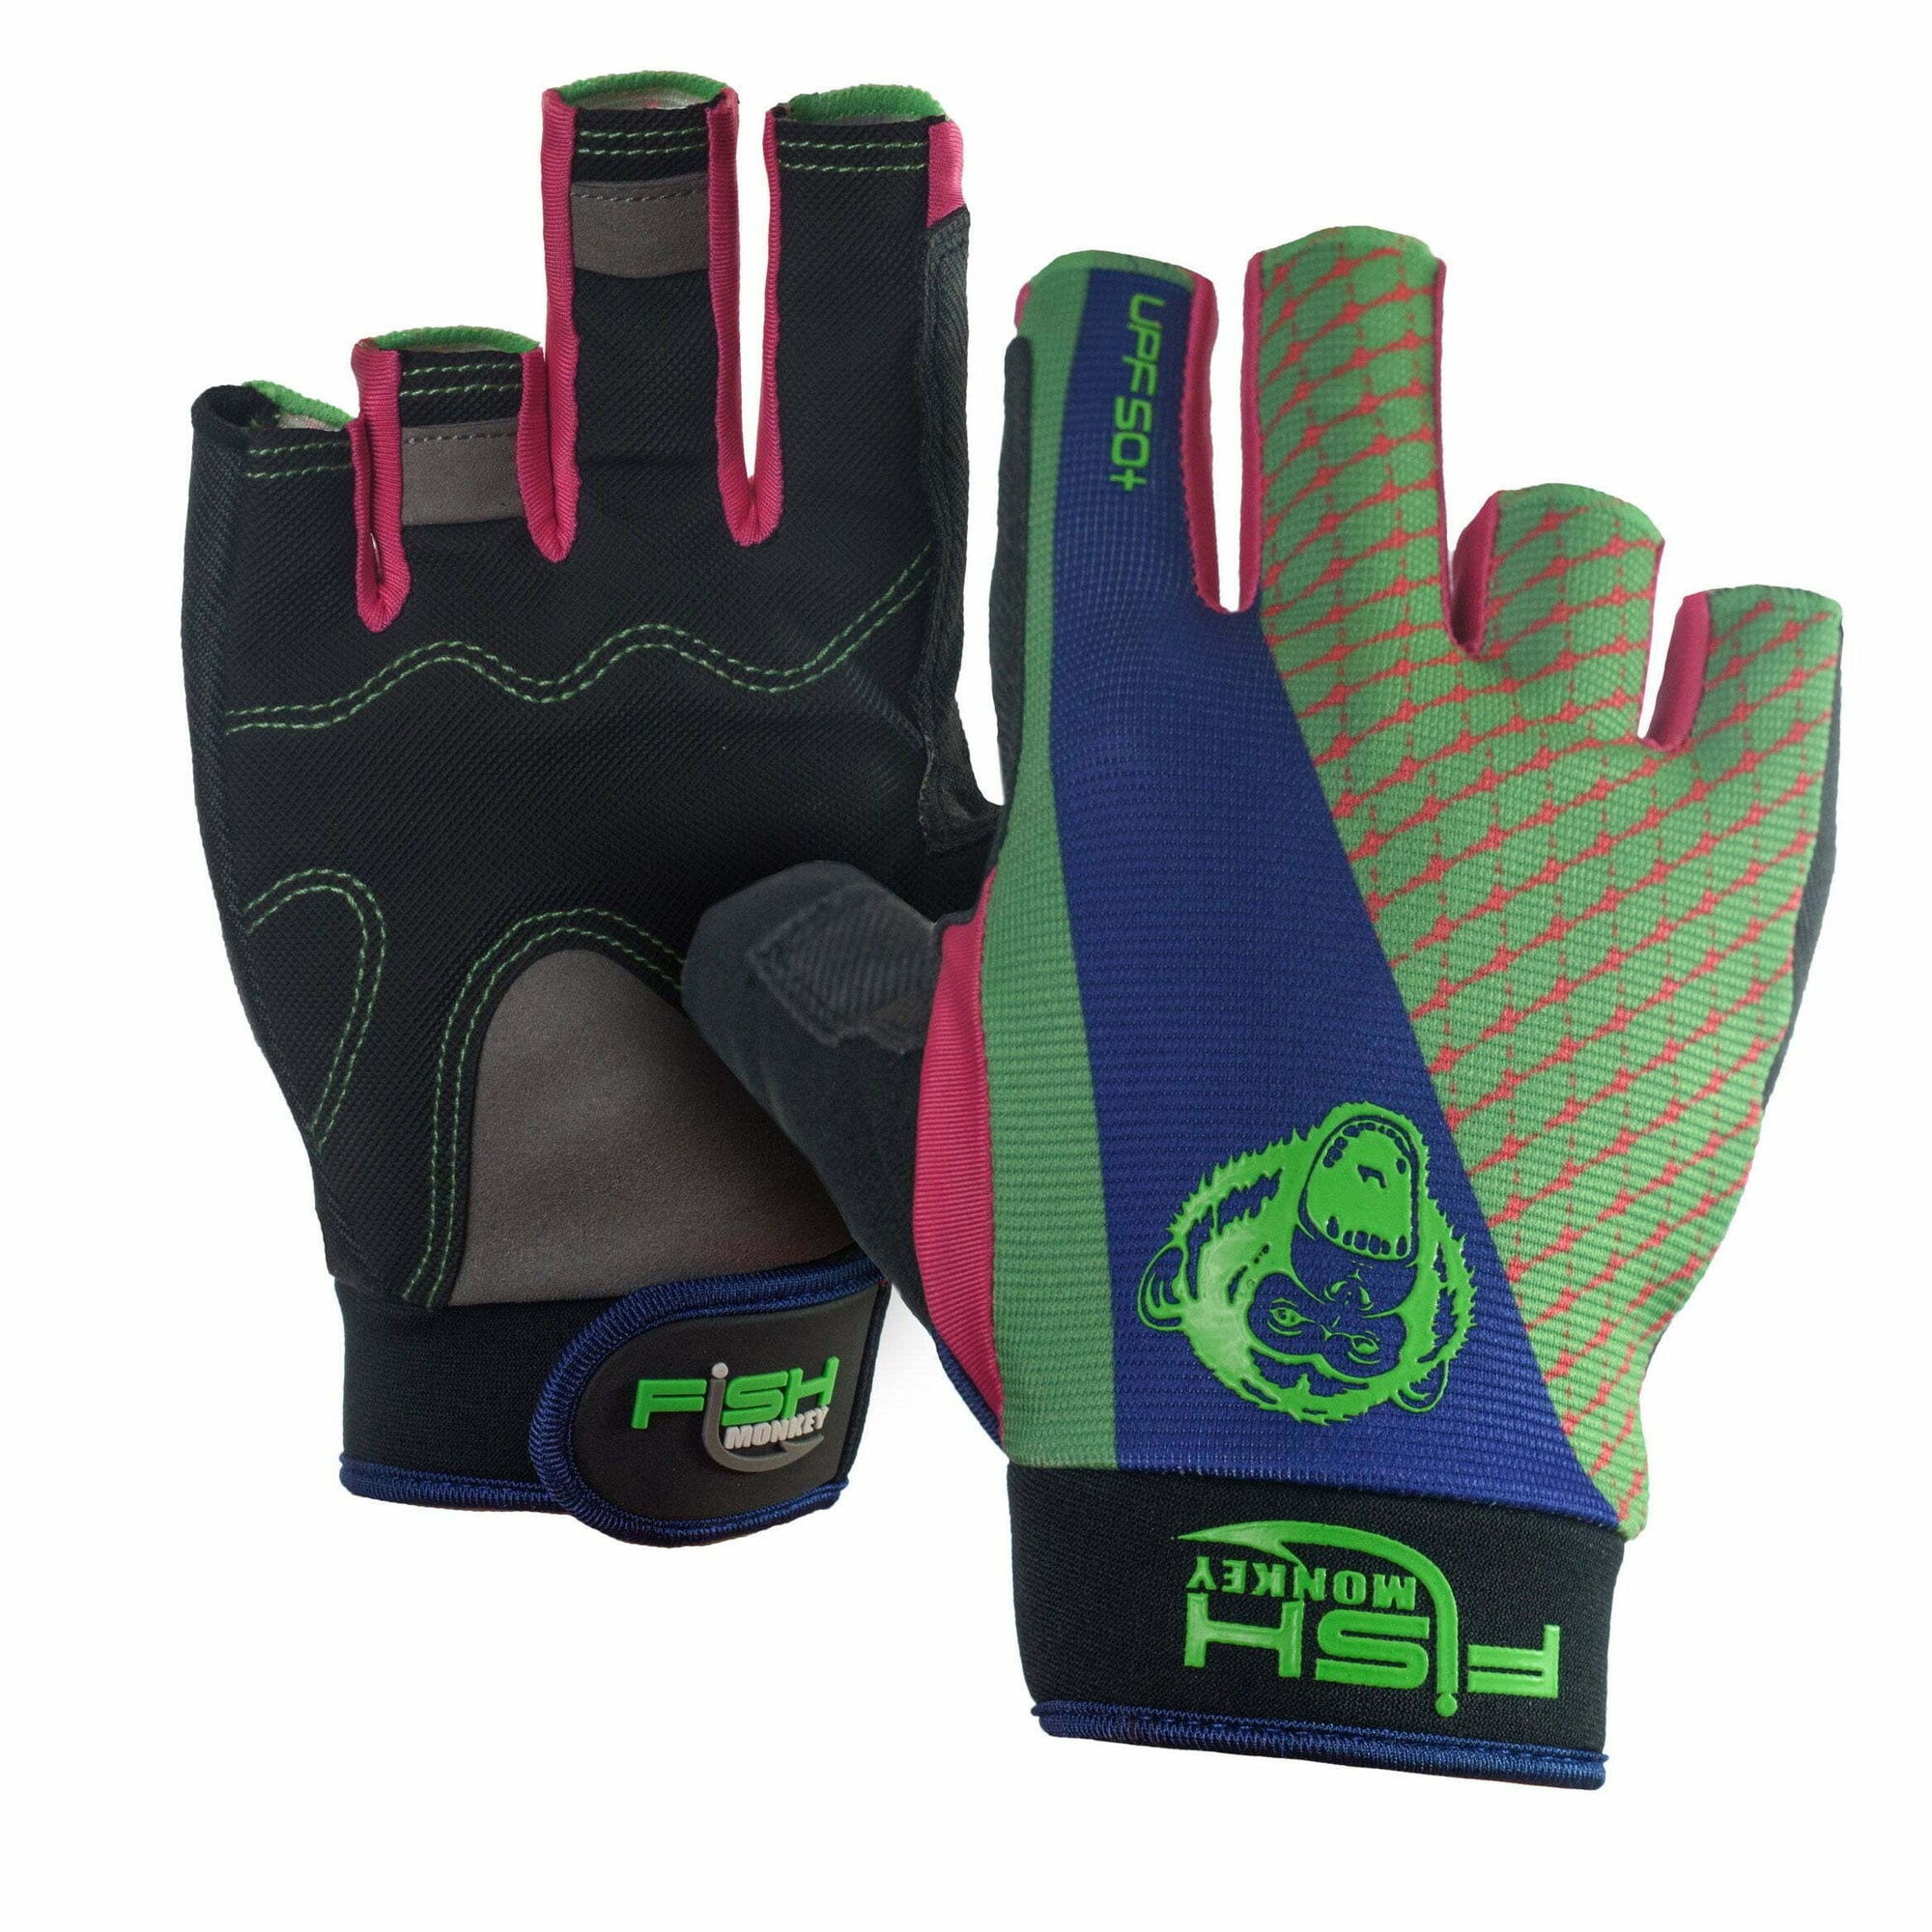 Fish Monkey The Crusher Half Finger Jigging Gloves Buy 1 @ 50% OFF or Buy 1 Get 2 Free at Price of One